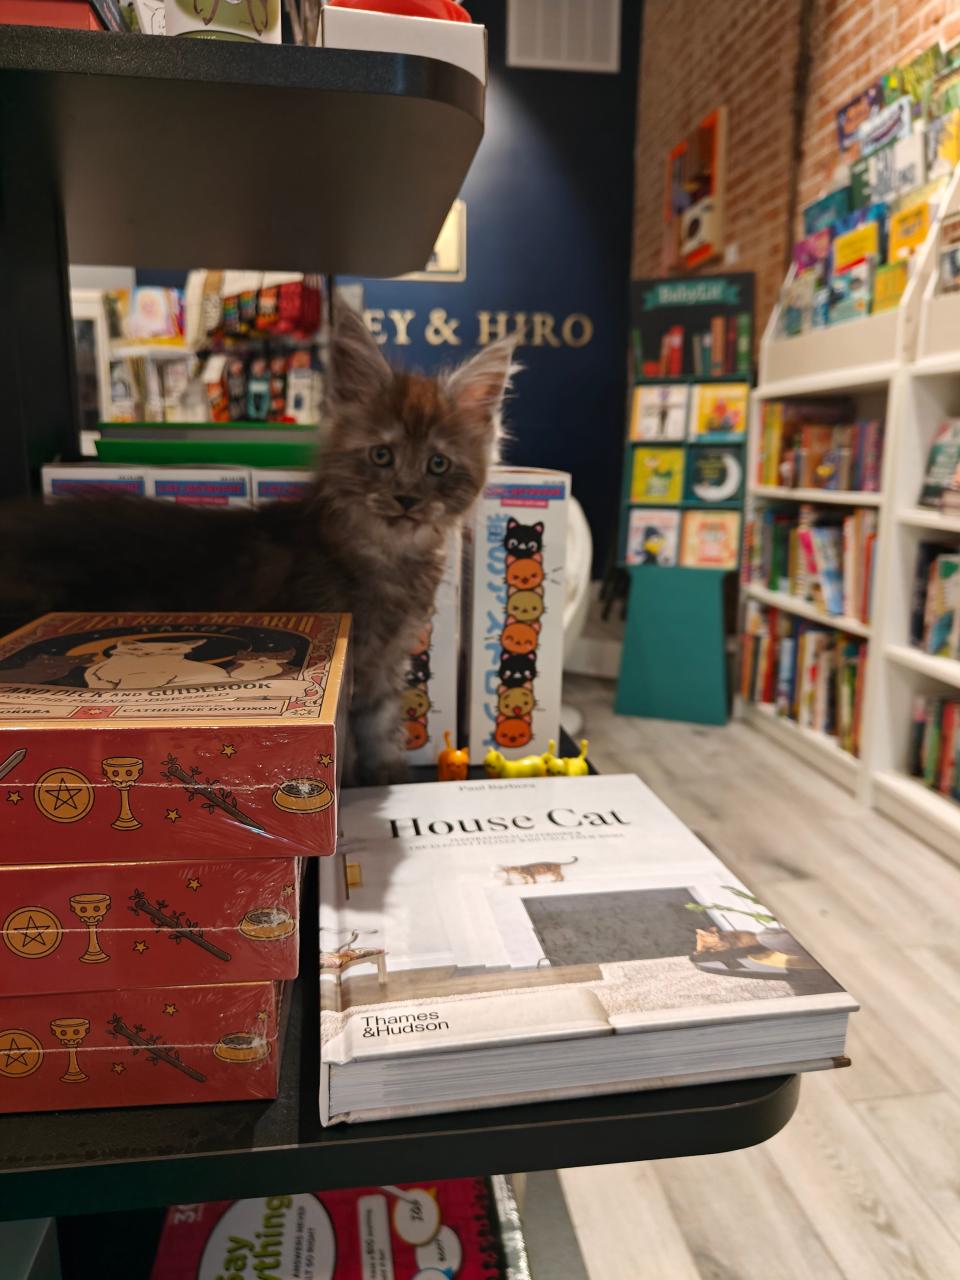 Huxley & Hiro, an independent bookstore in downtown Wilmington, Delaware, is named after a Maine Coon called Huxley and a Shiba Inu called Hiro, who make regular appearances to welcome customers.